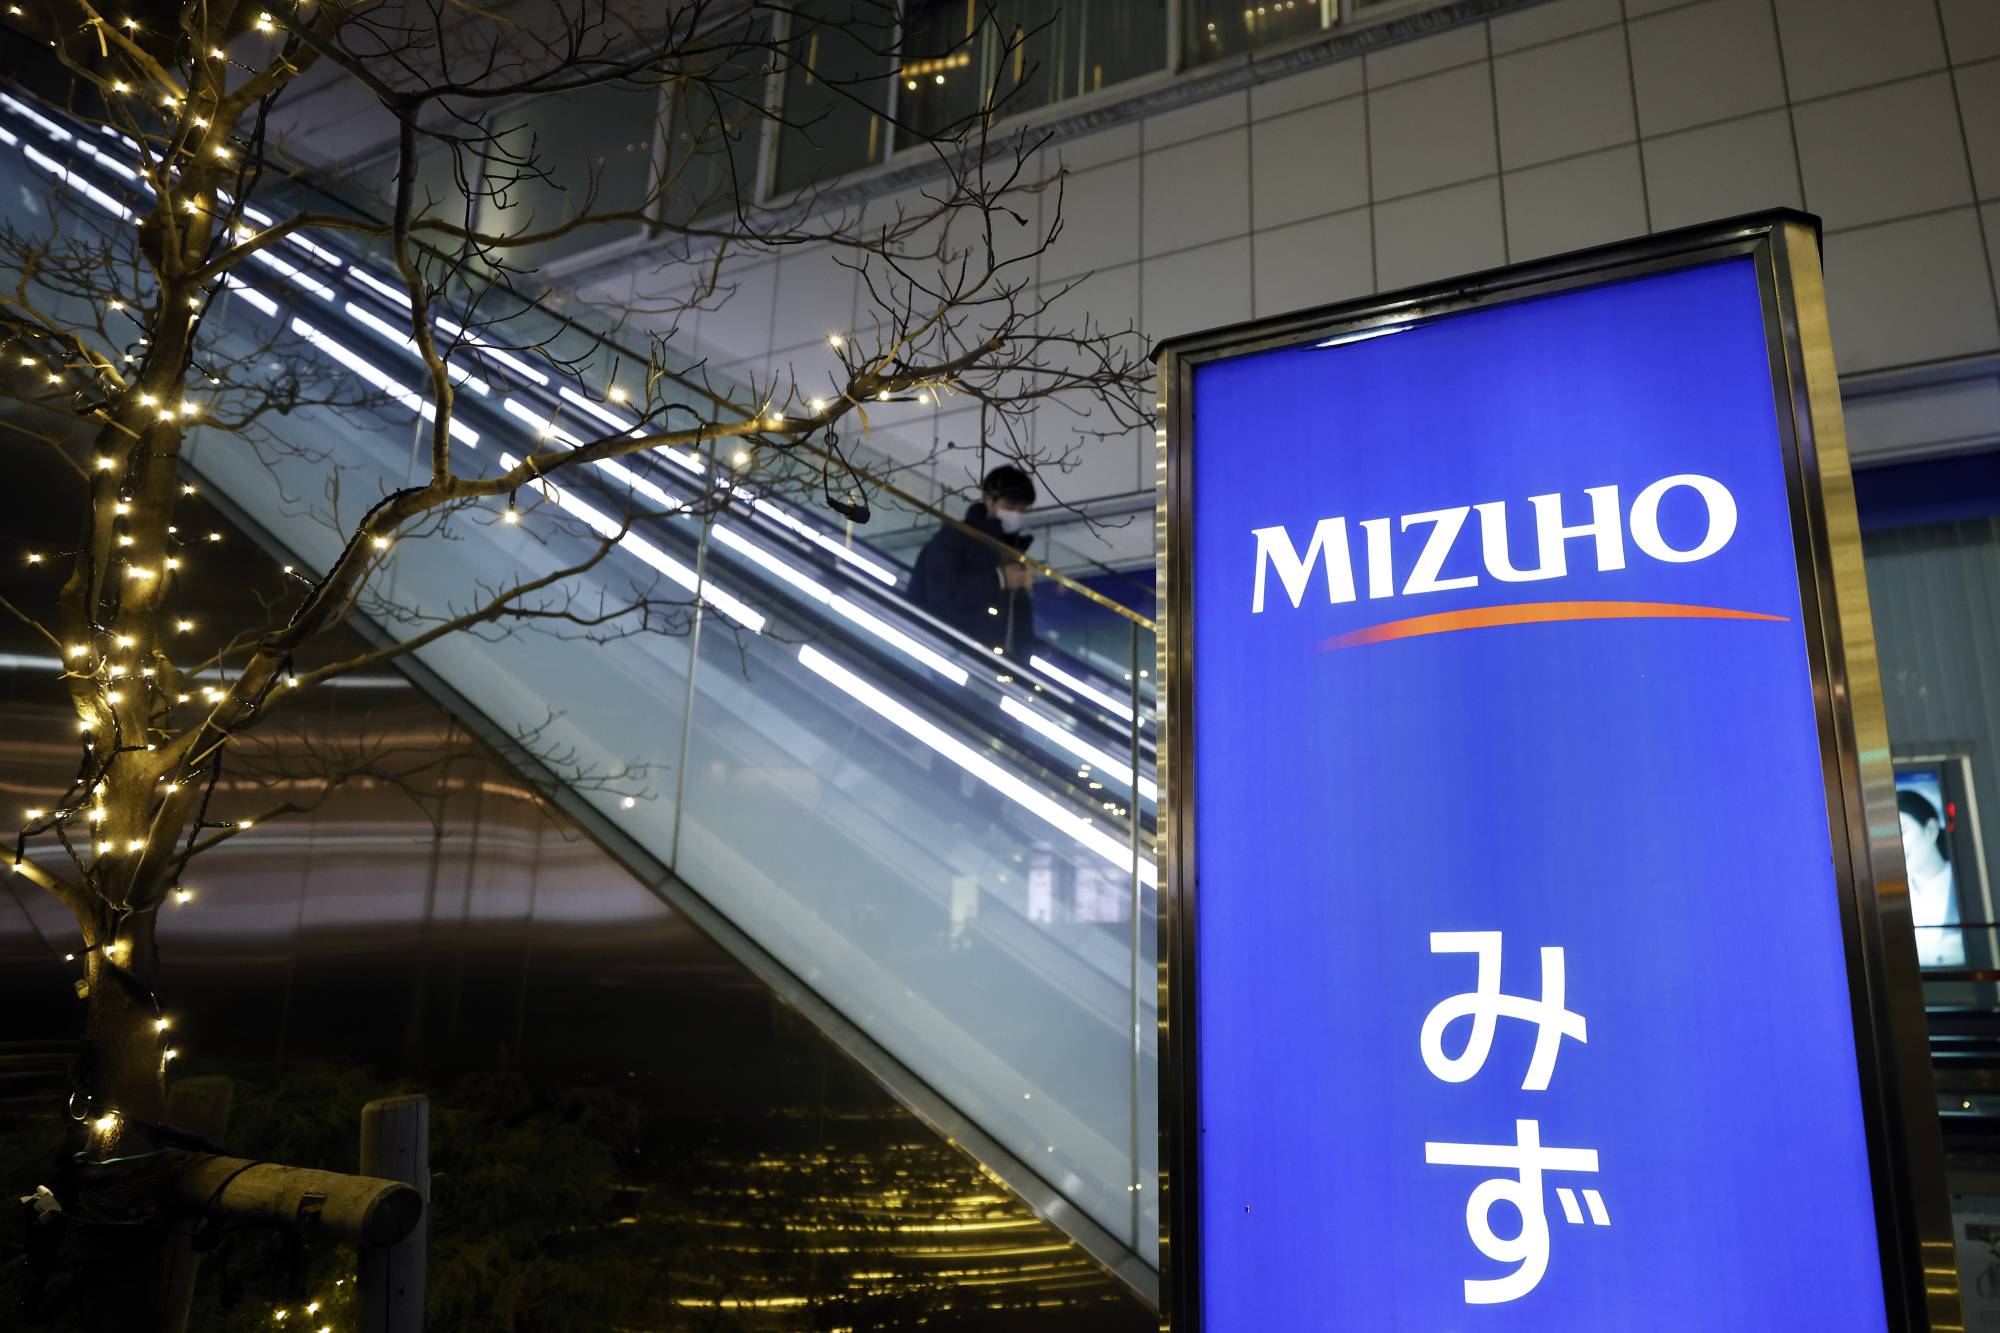 Mizuho Bank experienced a system failure that disrupted ATMs on Friday, the major banking group said, marking its 11th such incident since February last year. | BLOOMBERG